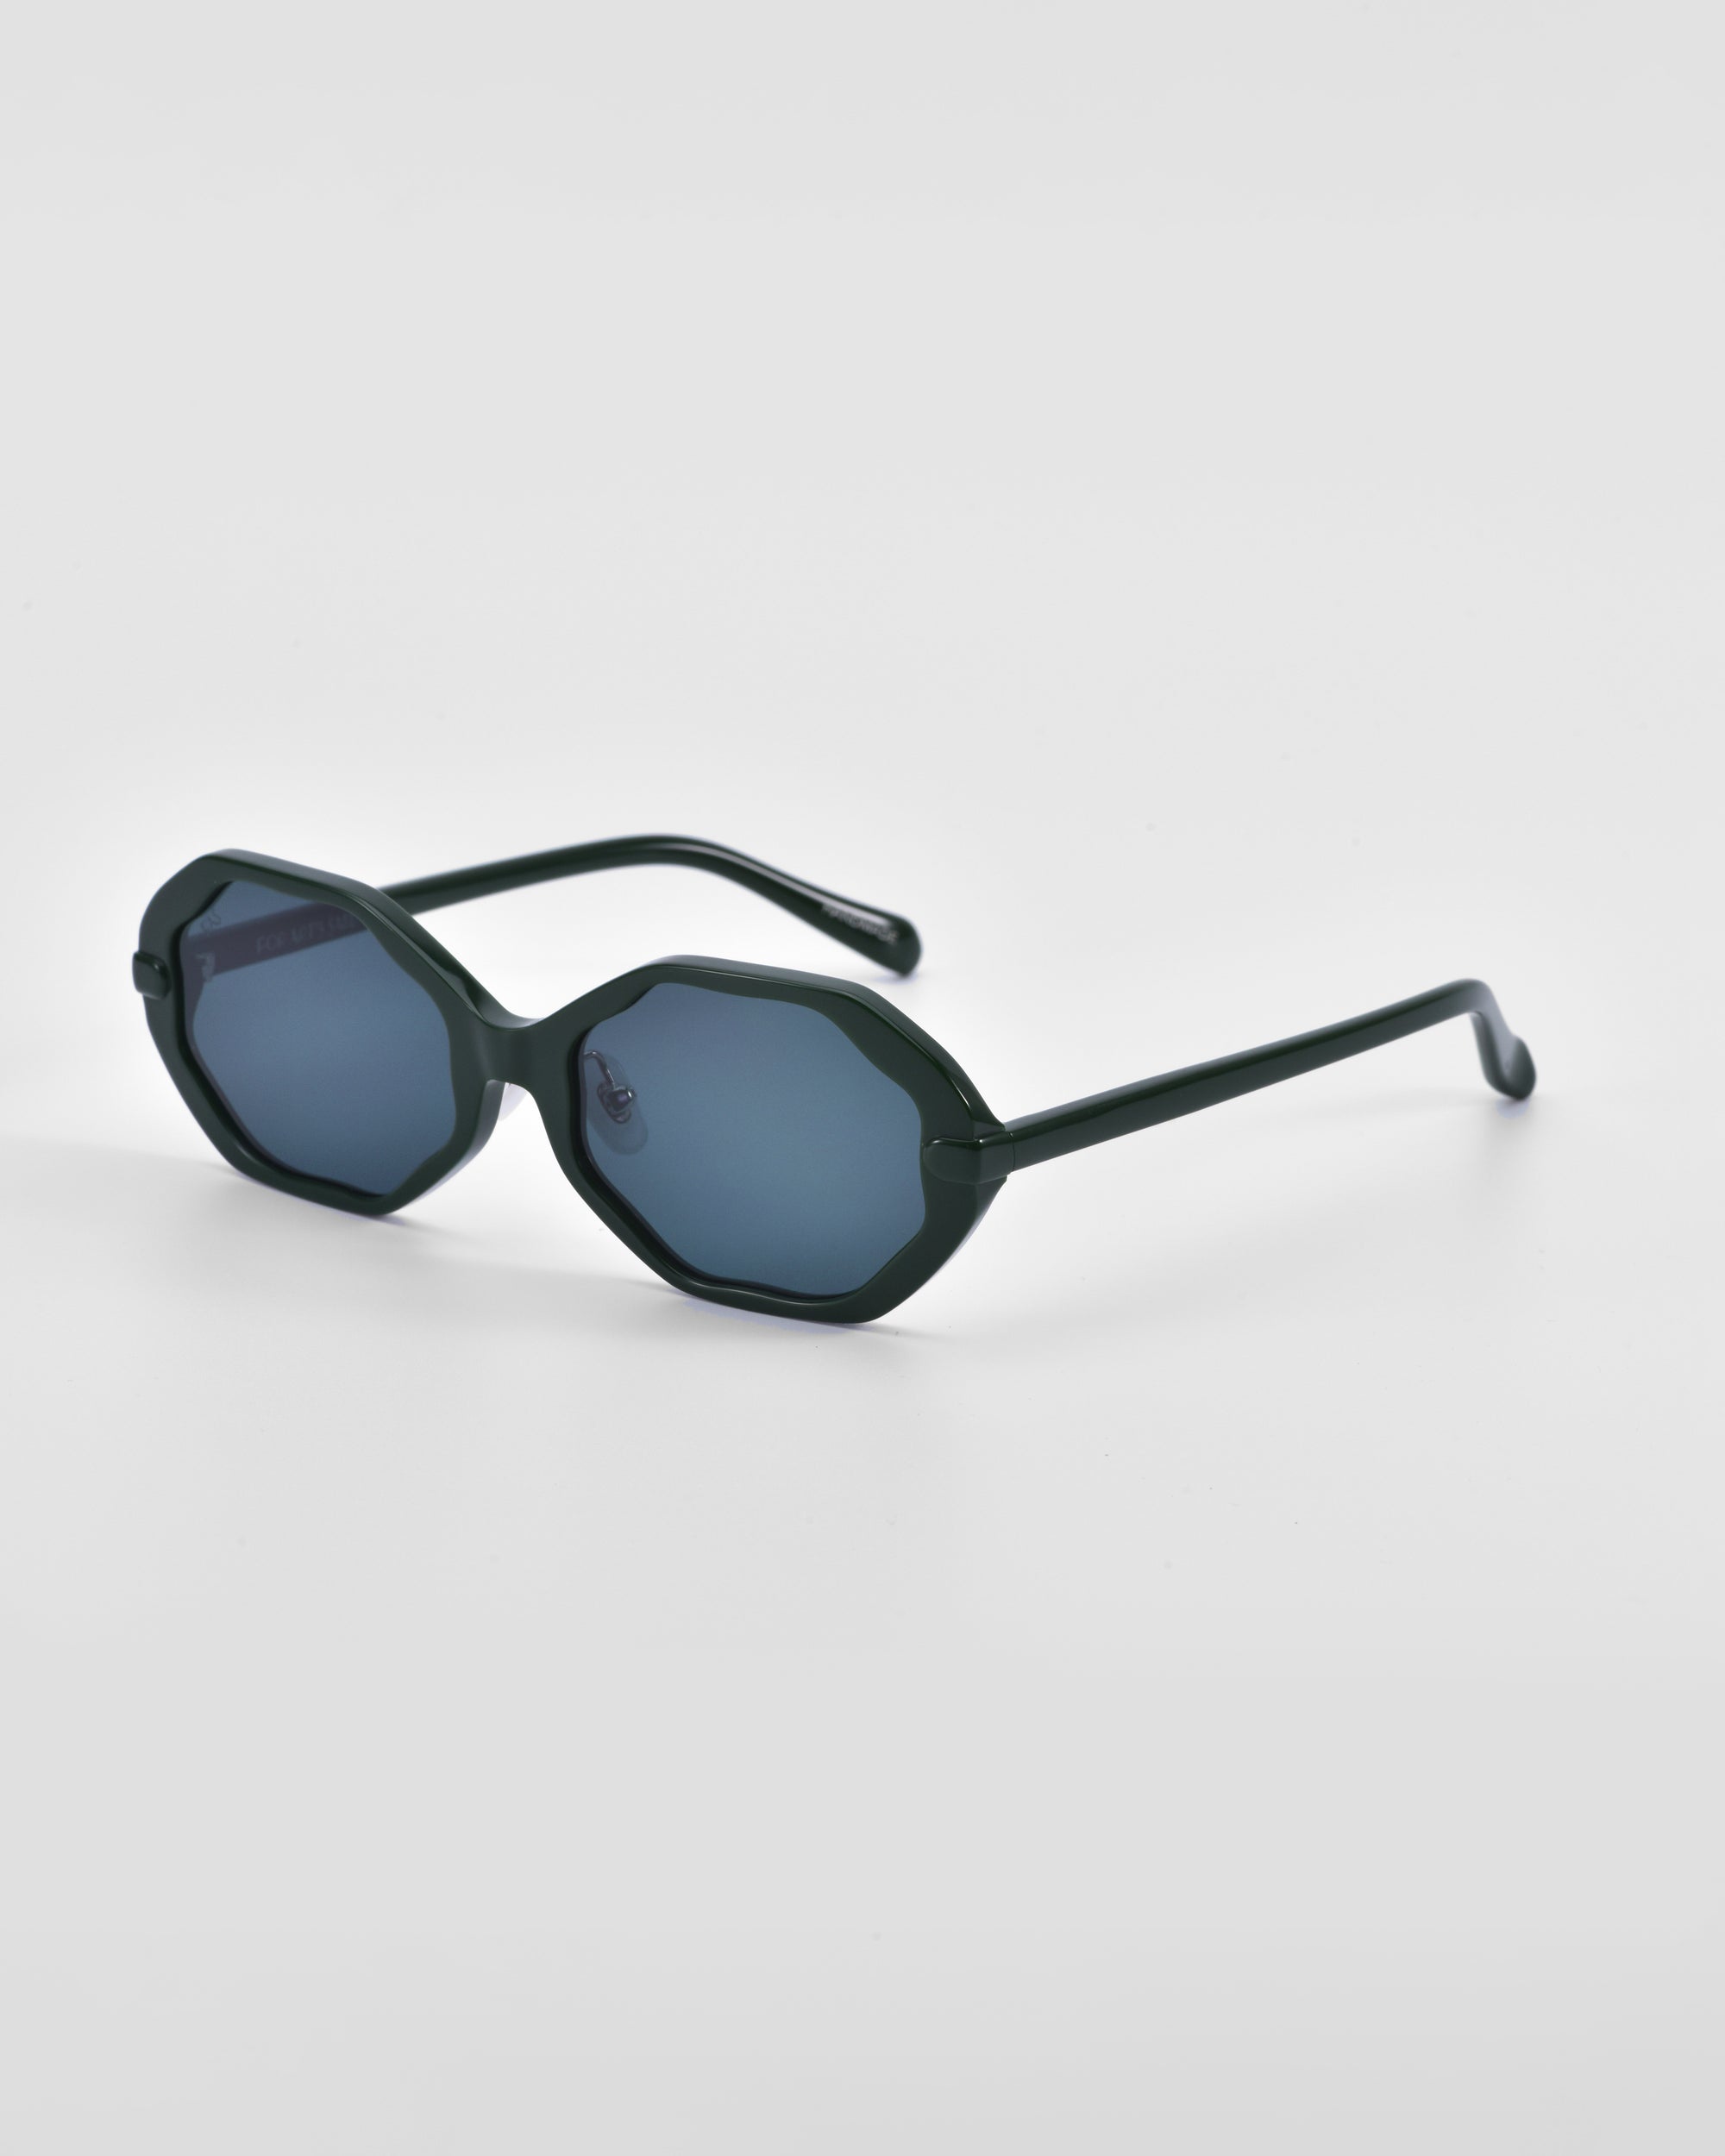 A pair of For Art's Sake® Lotus sunglasses featuring a dark green angular silhouette and dark tinted lenses, complemented by thin matching green arms and jade-stone nose pads, placed on a plain white background.